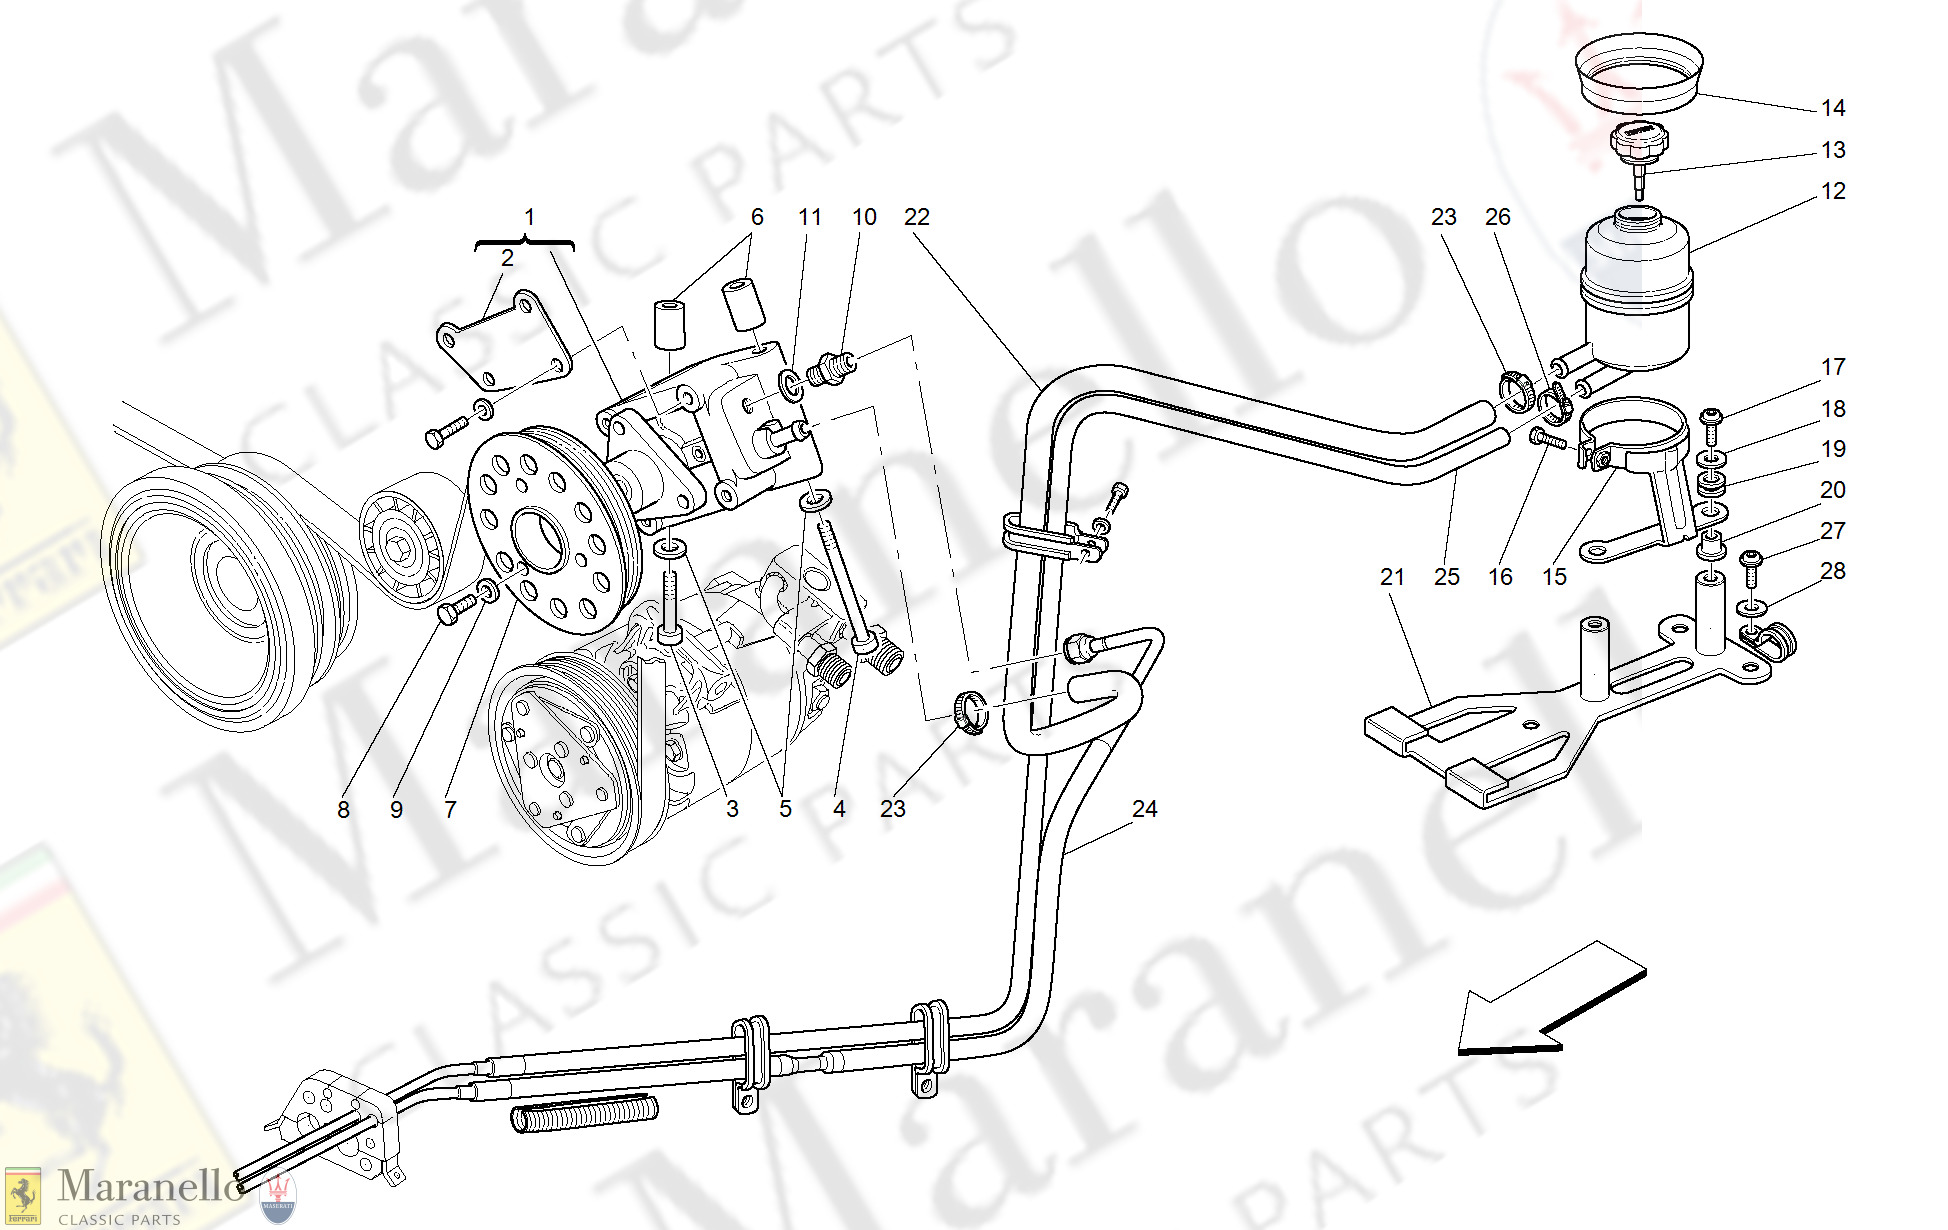 038 - Hydraulic Steering Pump And Tank